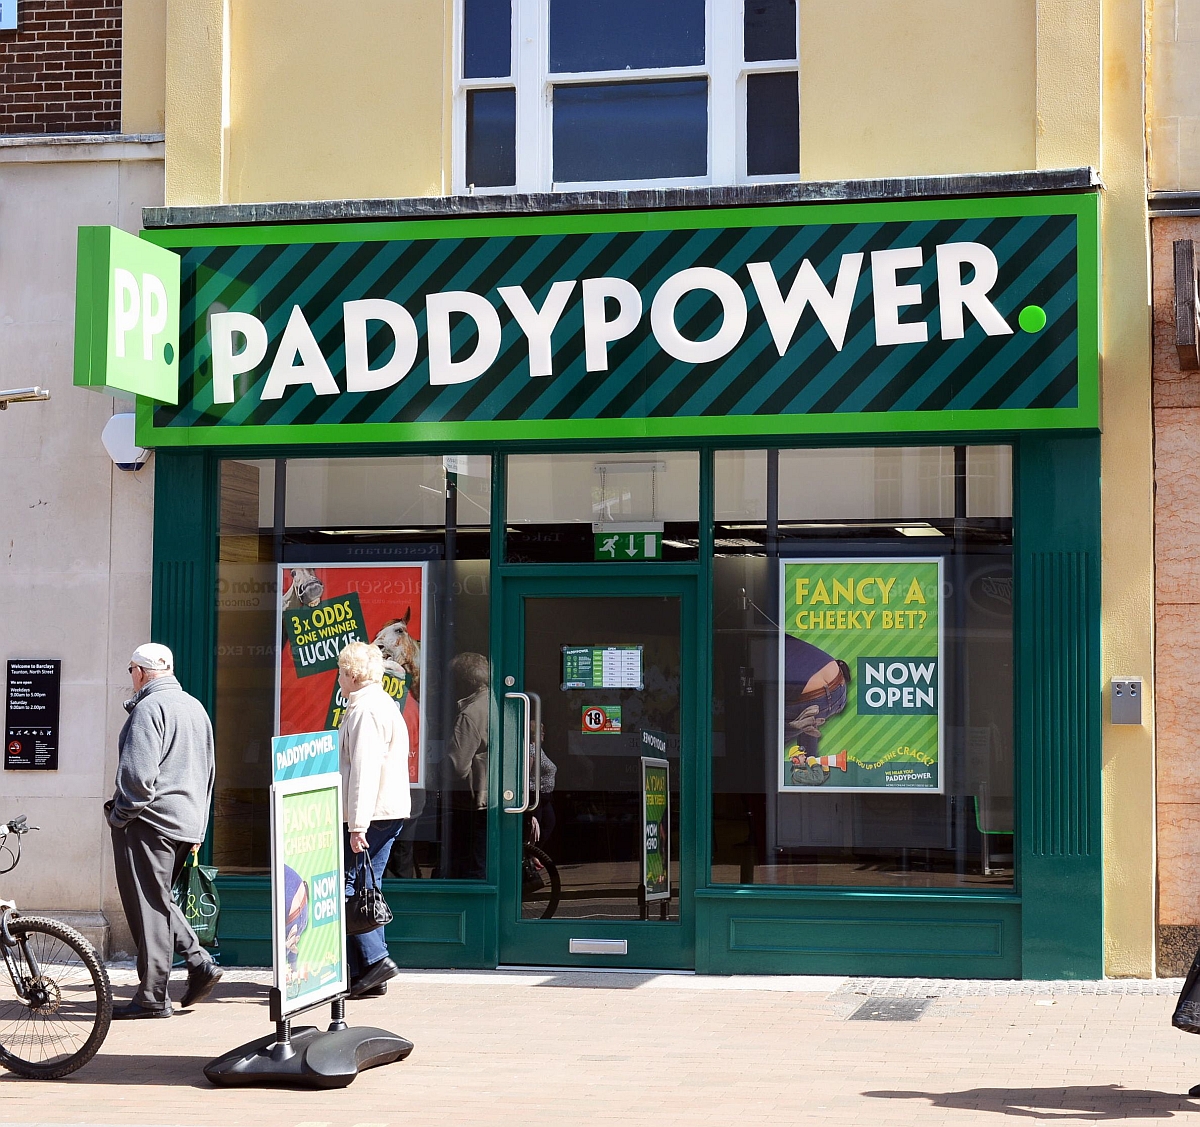 How to delete paddy power account yahoo